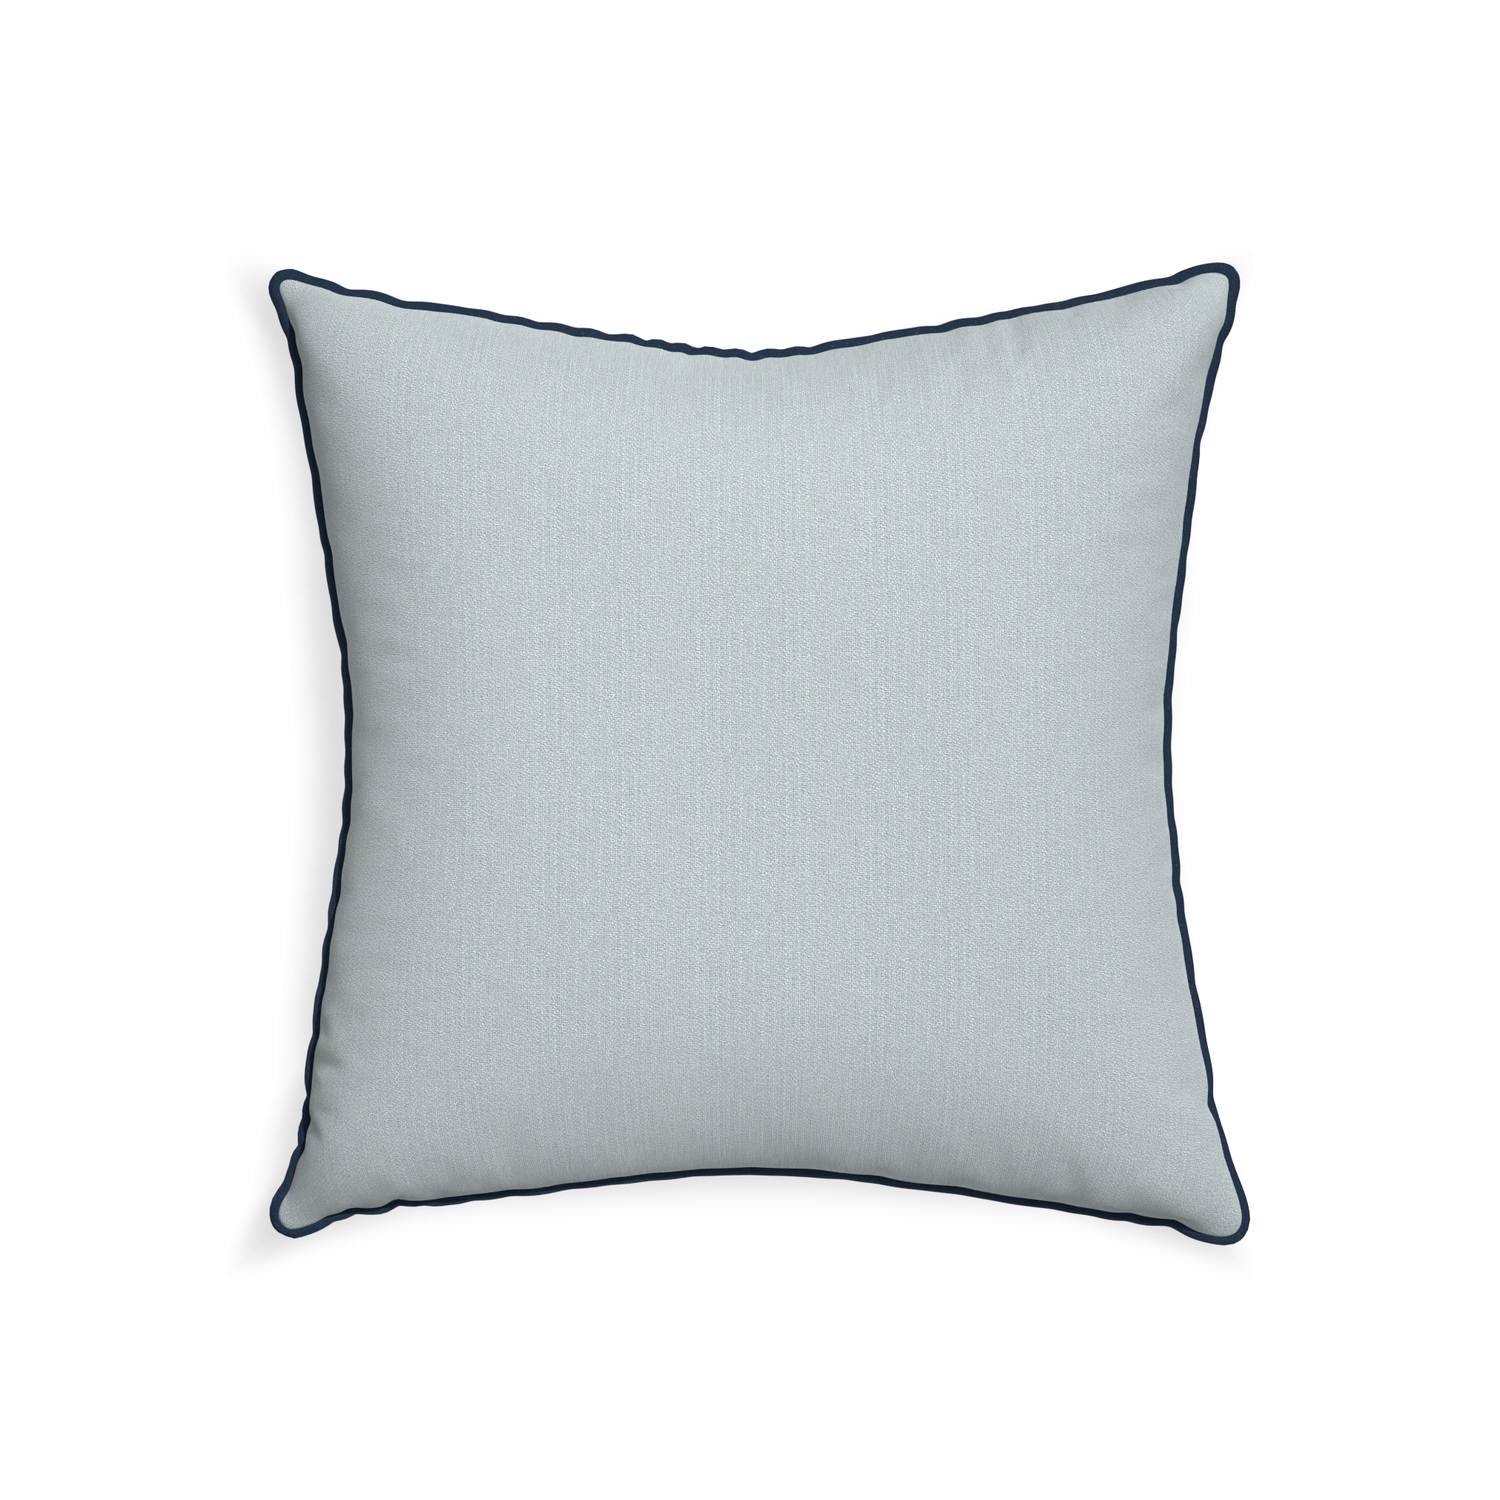 22-square sea custom grey bluepillow with c piping on white background